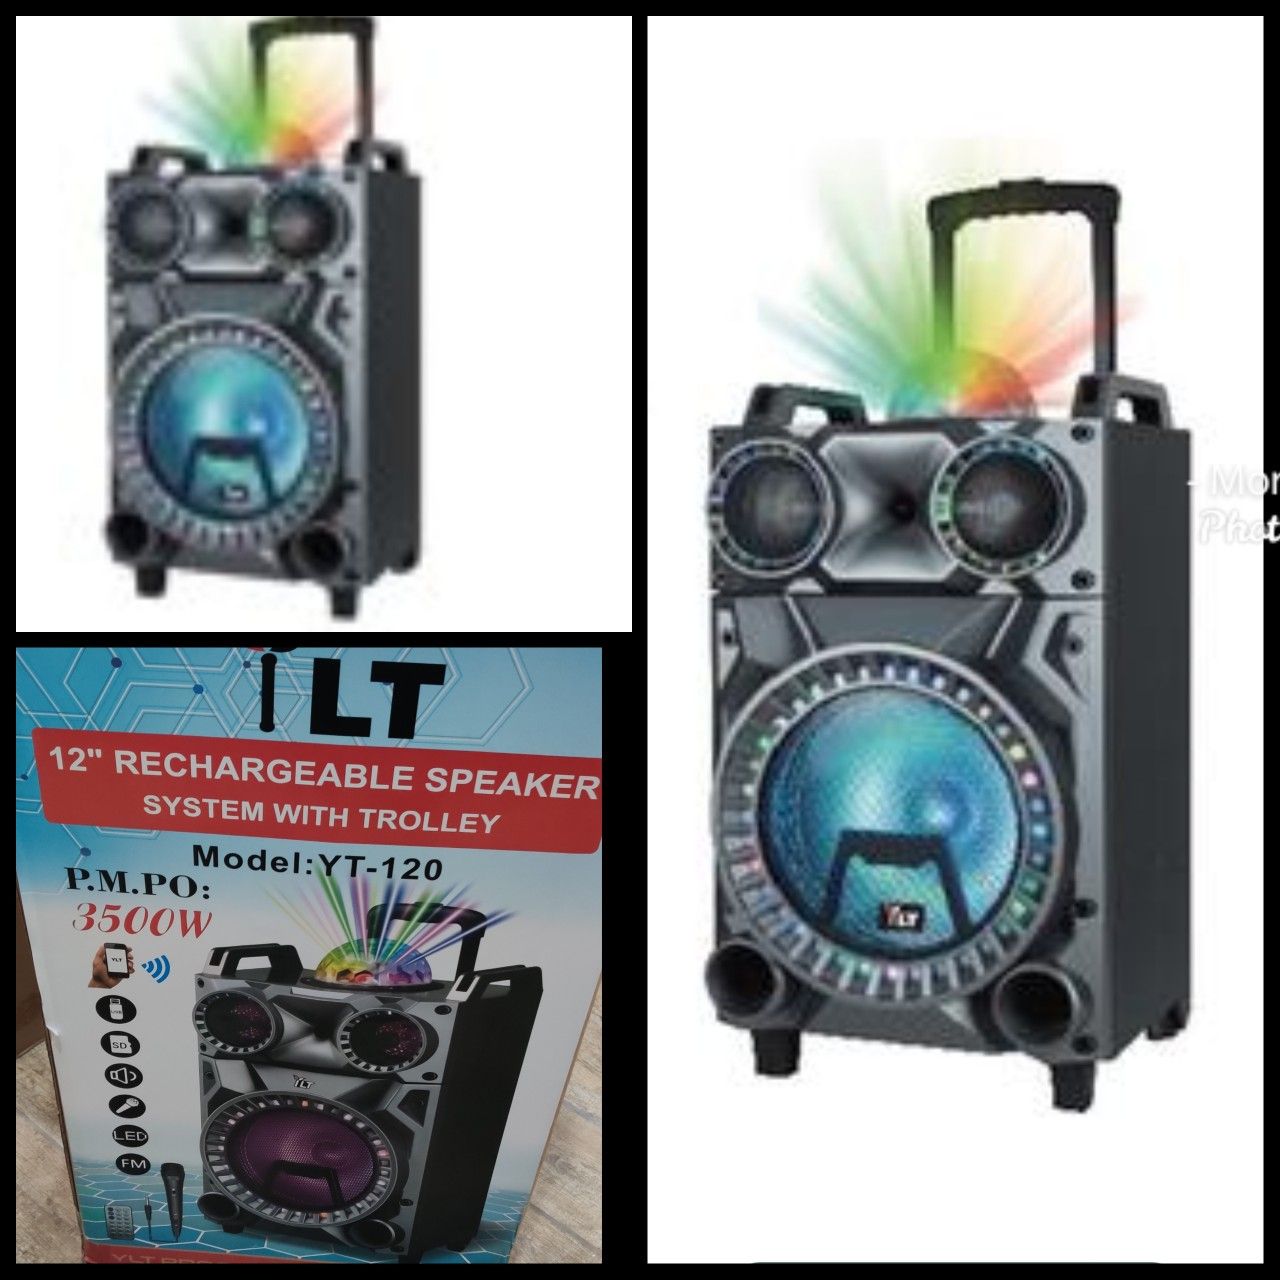 YLT 12 RECHARGEABLE SPEAKER WITH TROLLEY